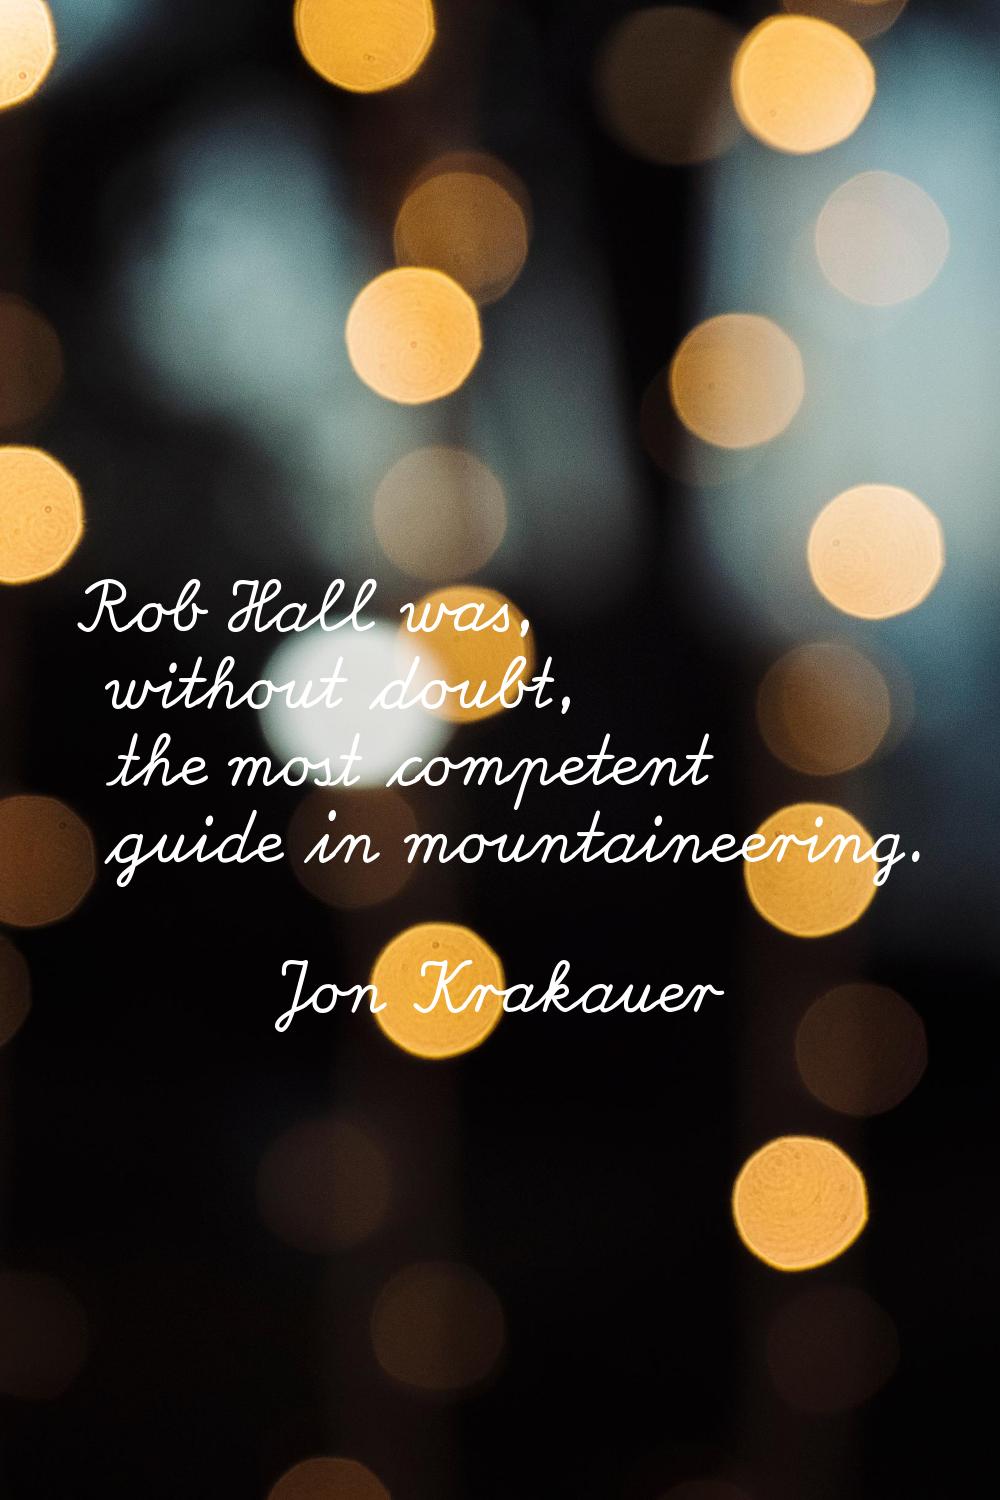 Rob Hall was, without doubt, the most competent guide in mountaineering.